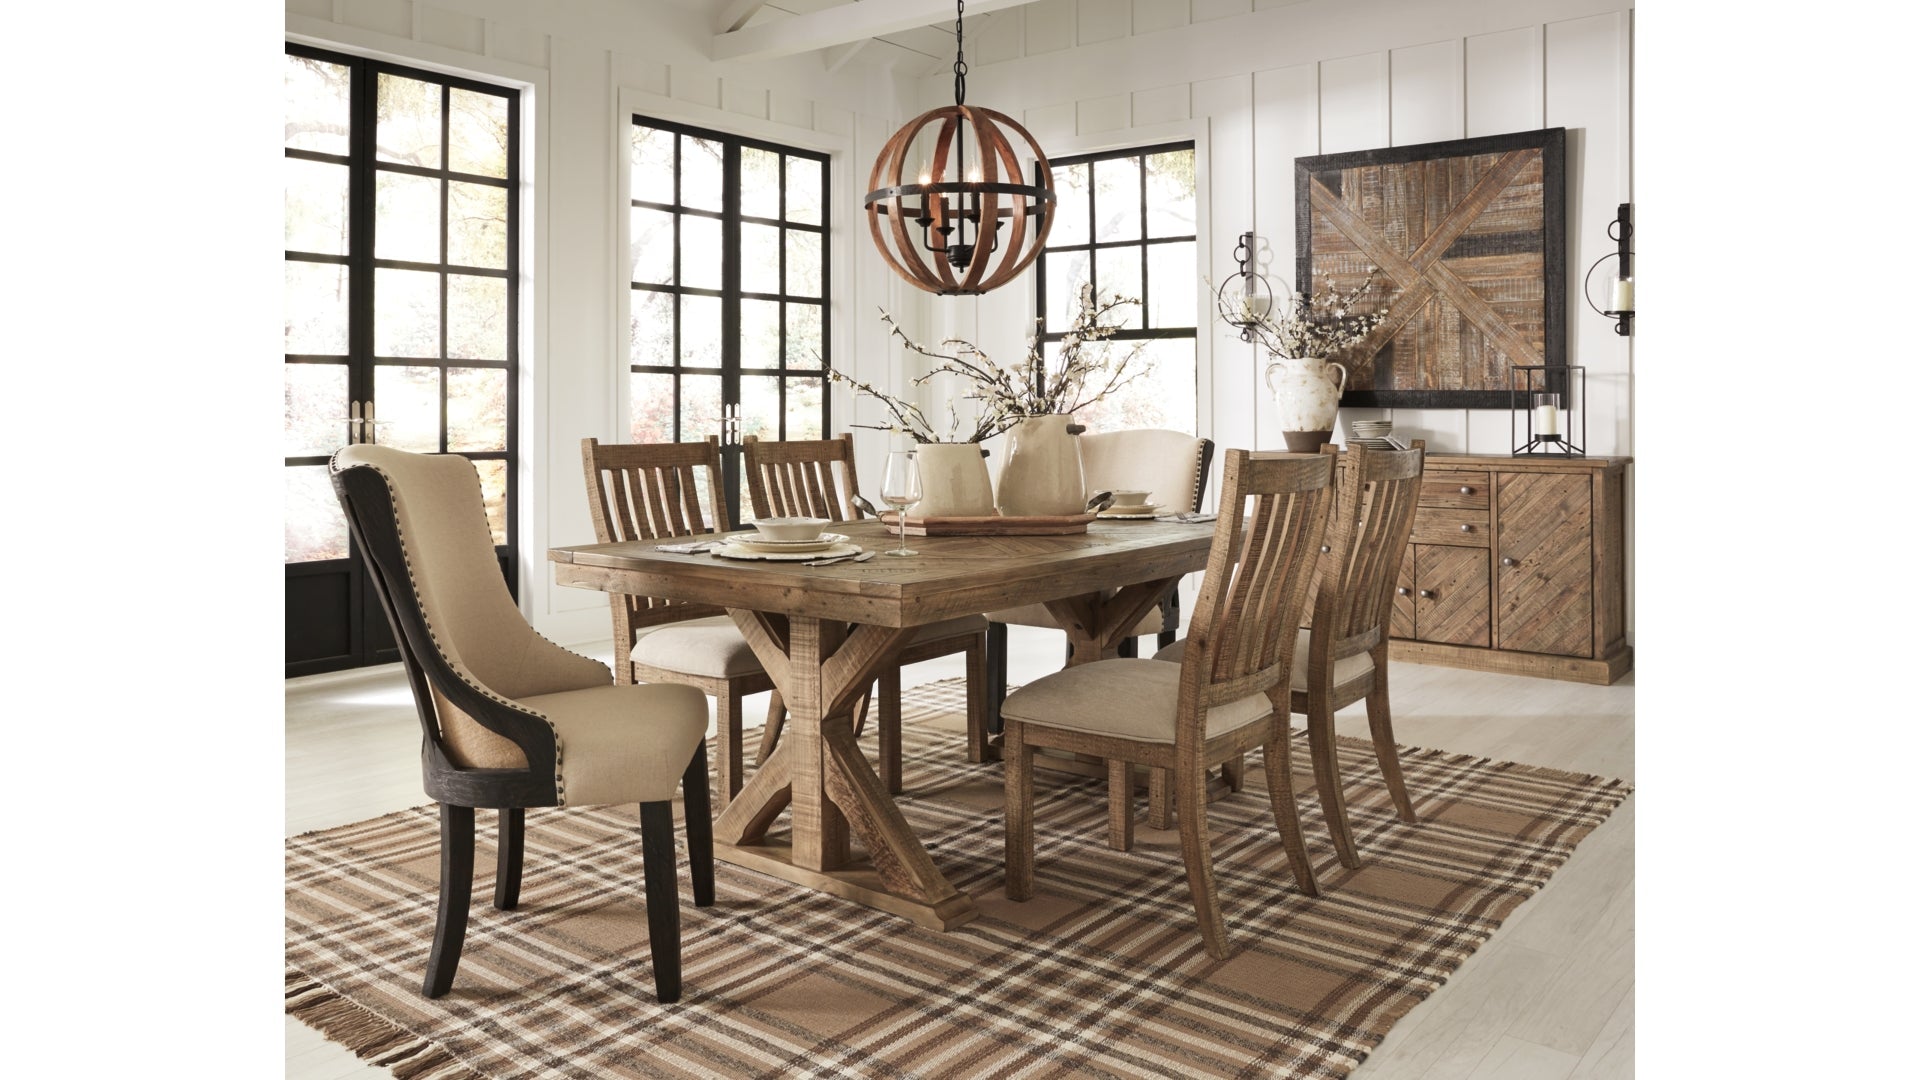 Grindleburg Dining Table and 6 Chairs